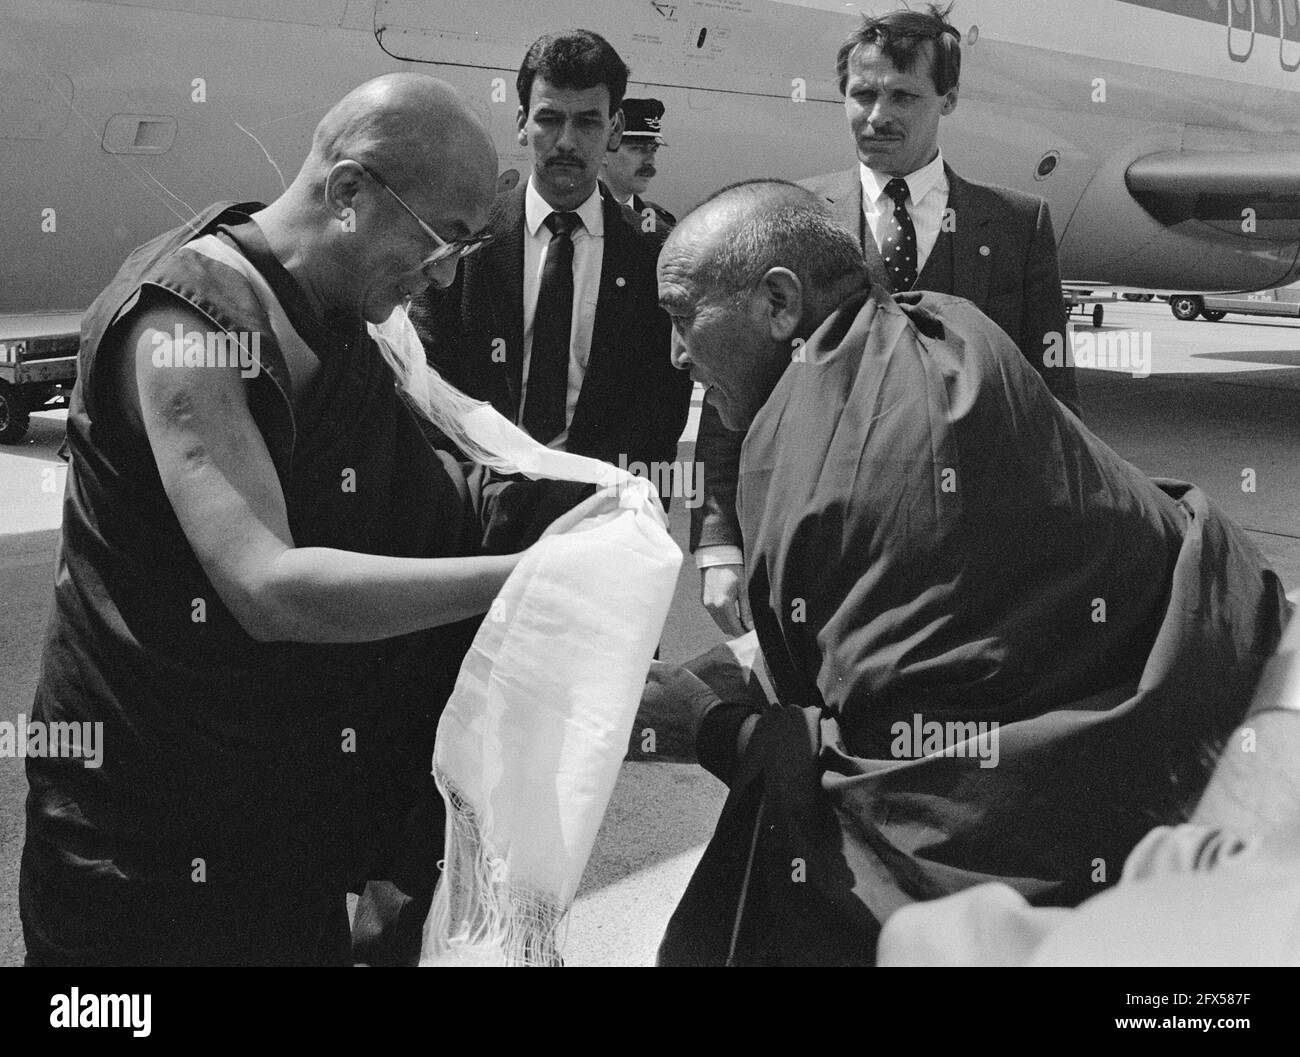 The Tibetan Dalai Lama arrives at Schiphol Airport, May 14, 1986, arrivals, visits, The Netherlands, 20th century press agency photo, news to remember, documentary, historic photography 1945-1990, visual stories, human history of the Twentieth Century, capturing moments in time Stock Photo